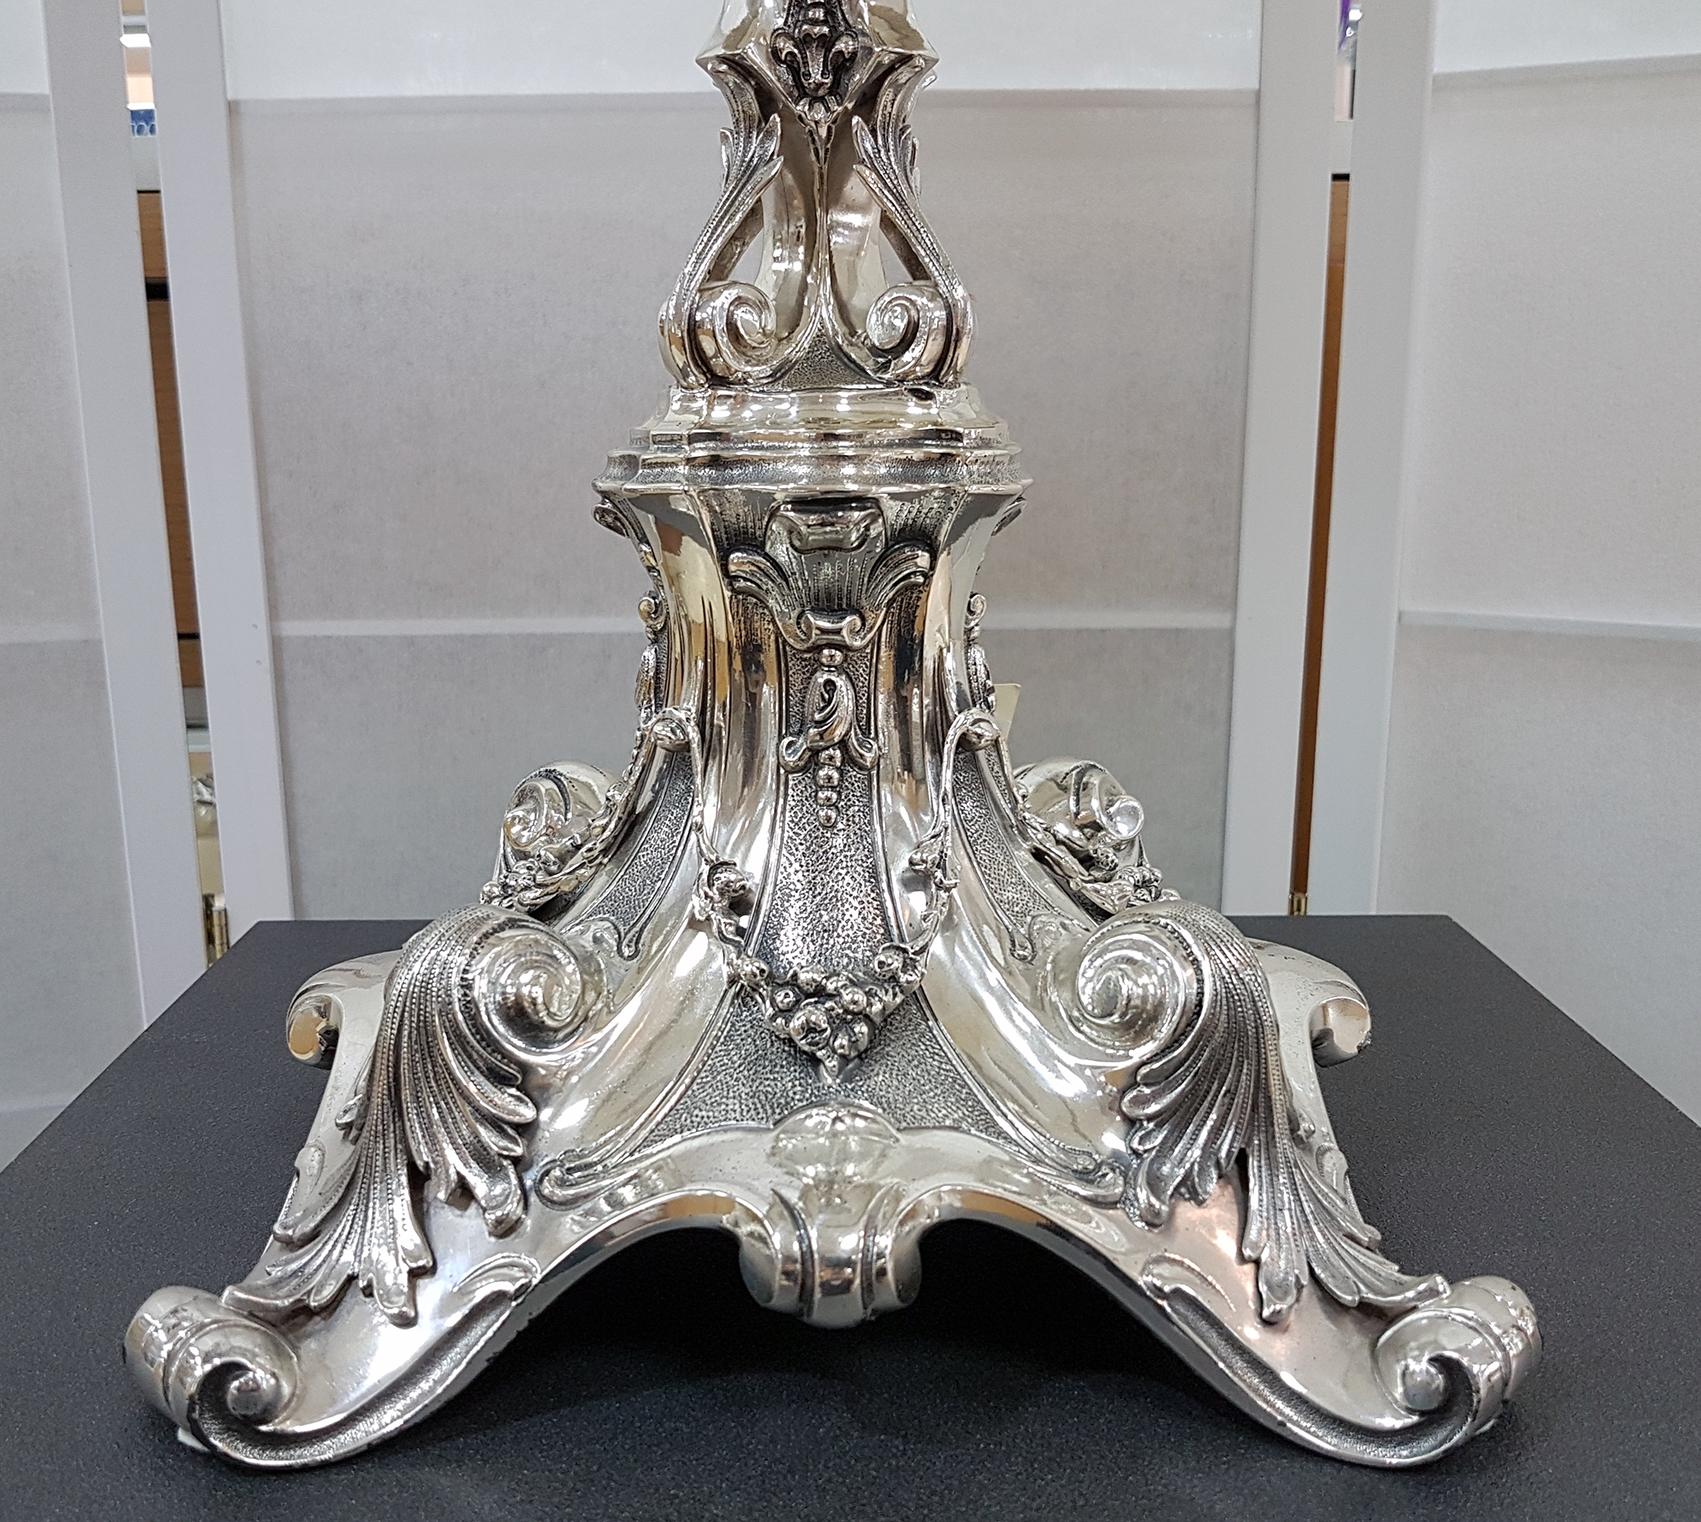 Superb lamp in solid sterling silver completely worked, embossed and hand chiselled. The square base and the stem are enriched with acanthus leaves, fruits and leaflets, typical of the Baroque style.
Its imposing size is suitable for environments